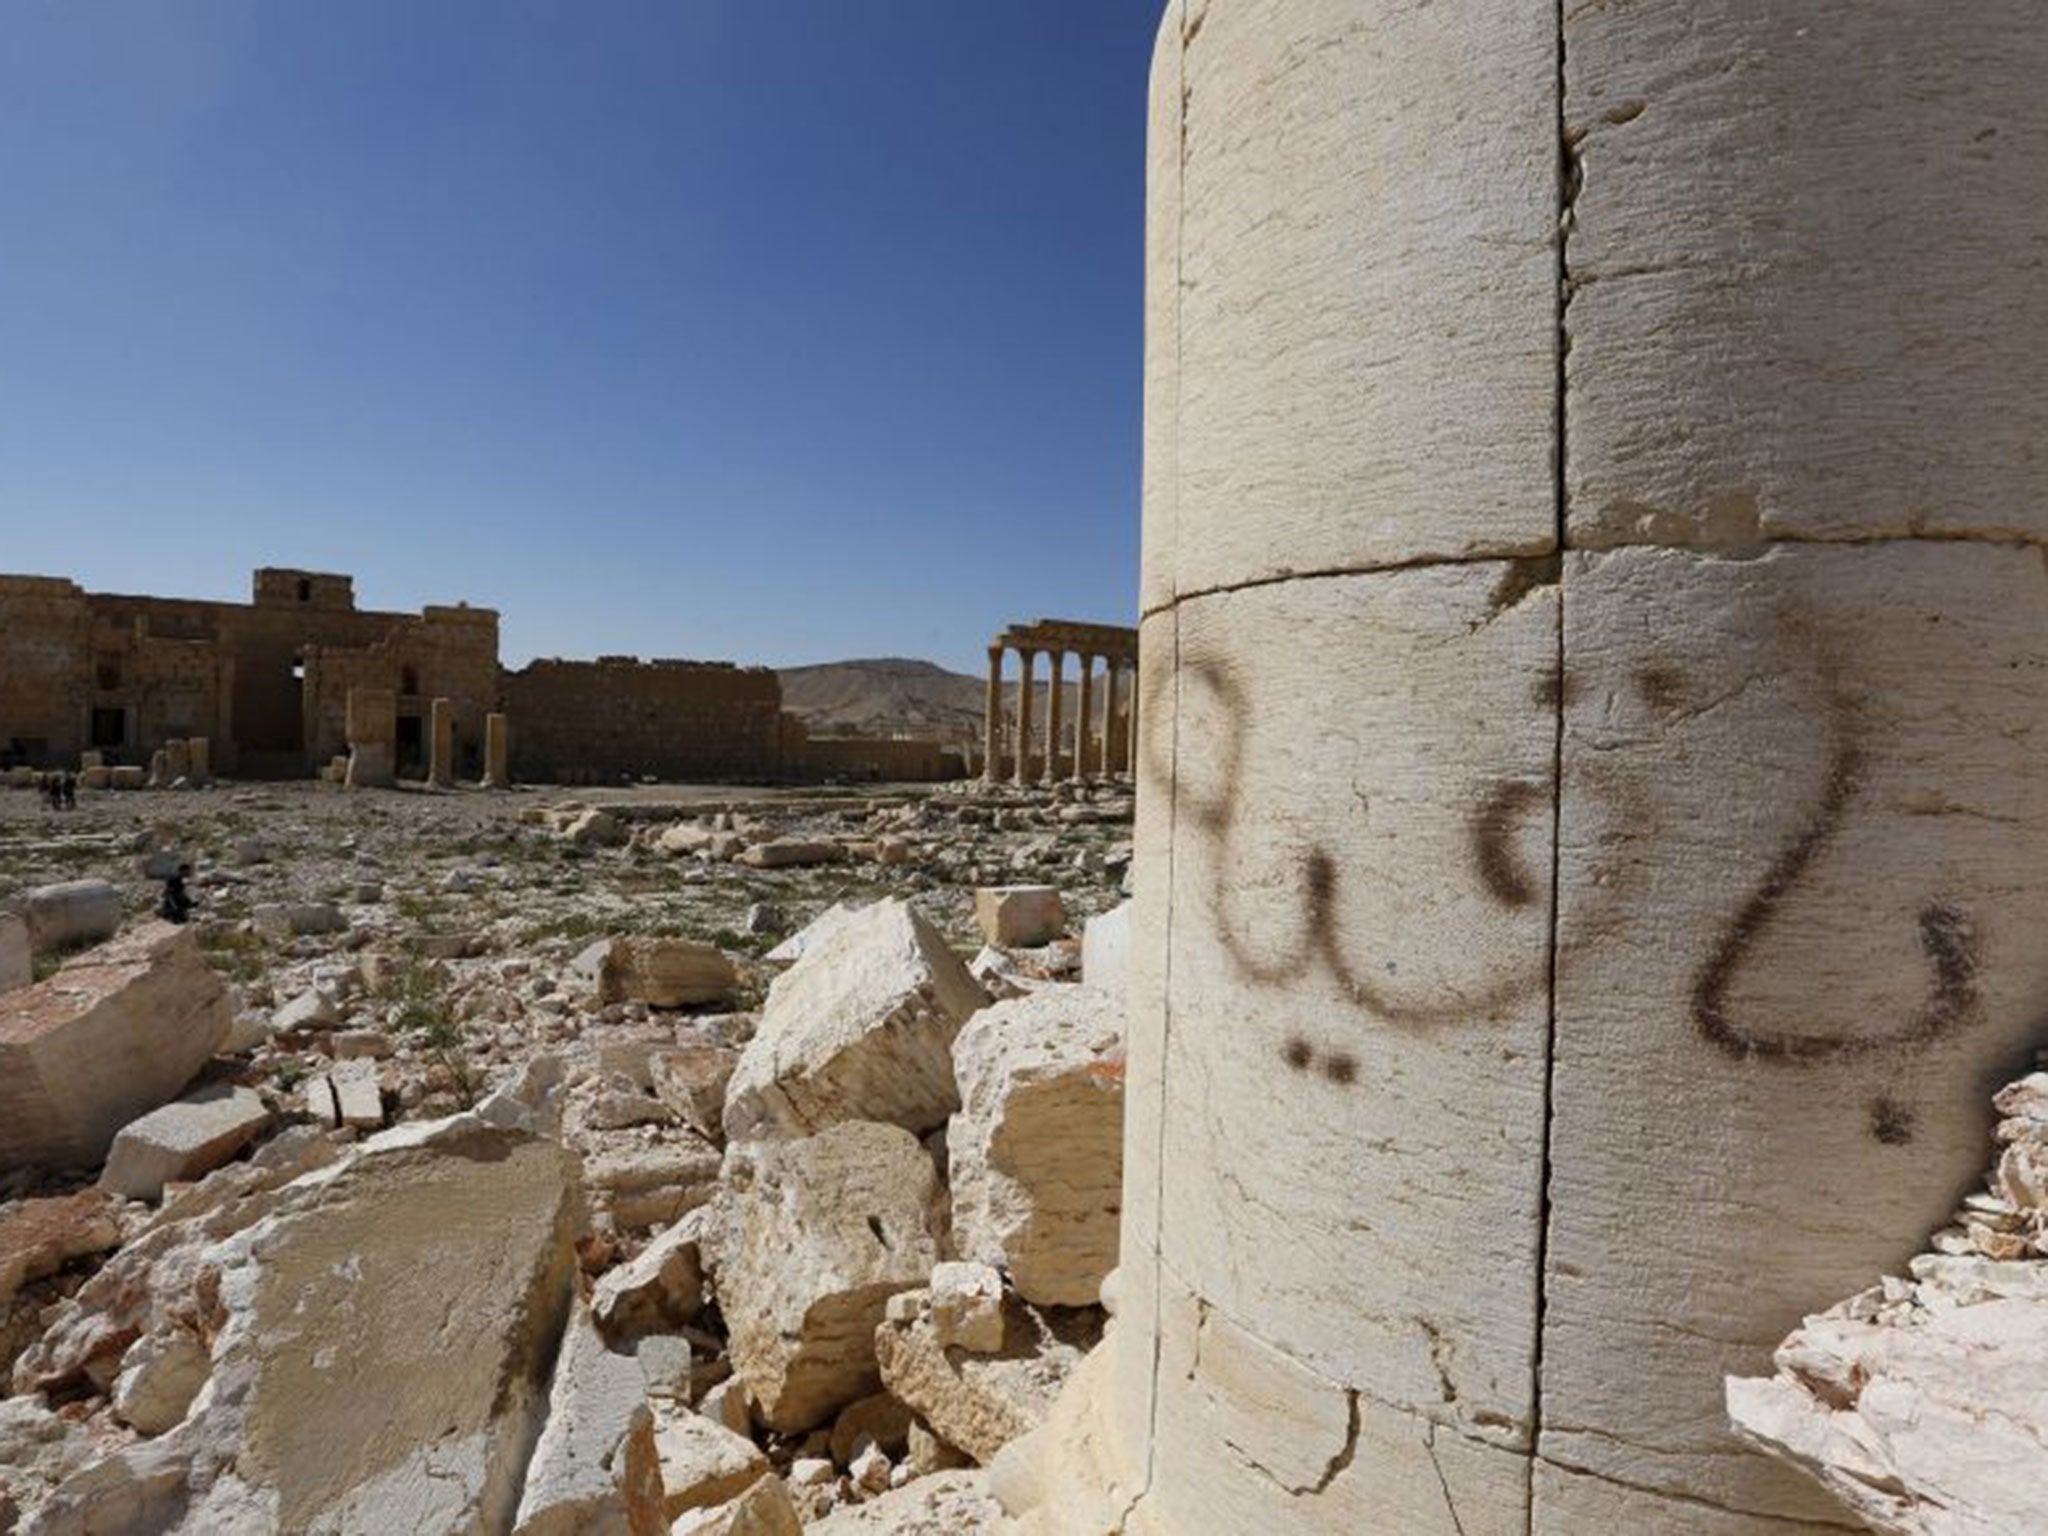 Graffiti sprayed by Islamic State militants which reads "We remain" is seen at theTemple of Bel in historic city of Palmyra.